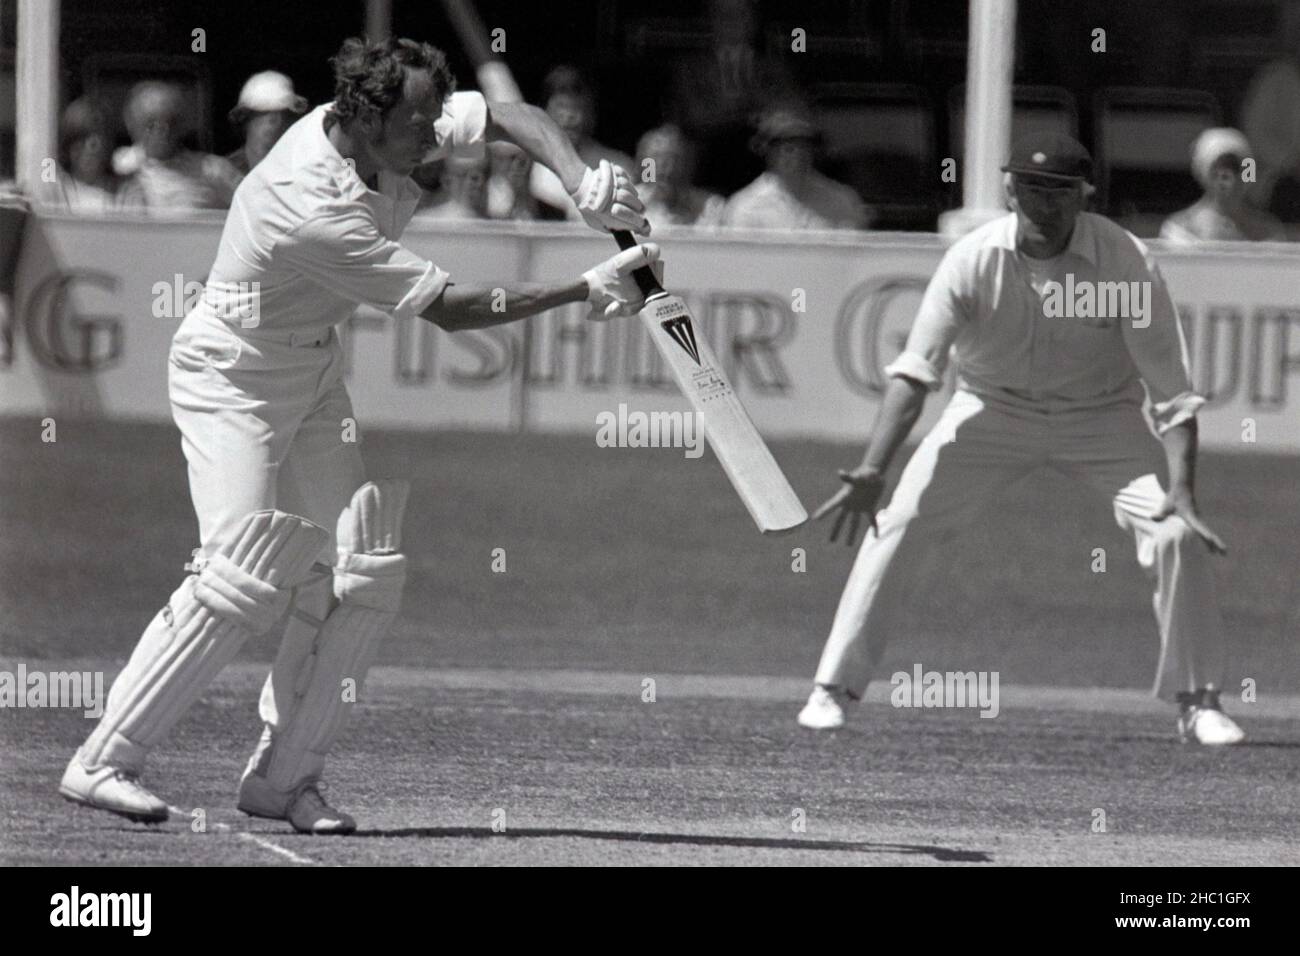 Brian Davison of Leicestershire batting, Northants v Leicestershire, (Schweppes County Championship) Northampton 27 - 30 May 1978. Fielder is David Steele (Northamptonshire). Stock Photo